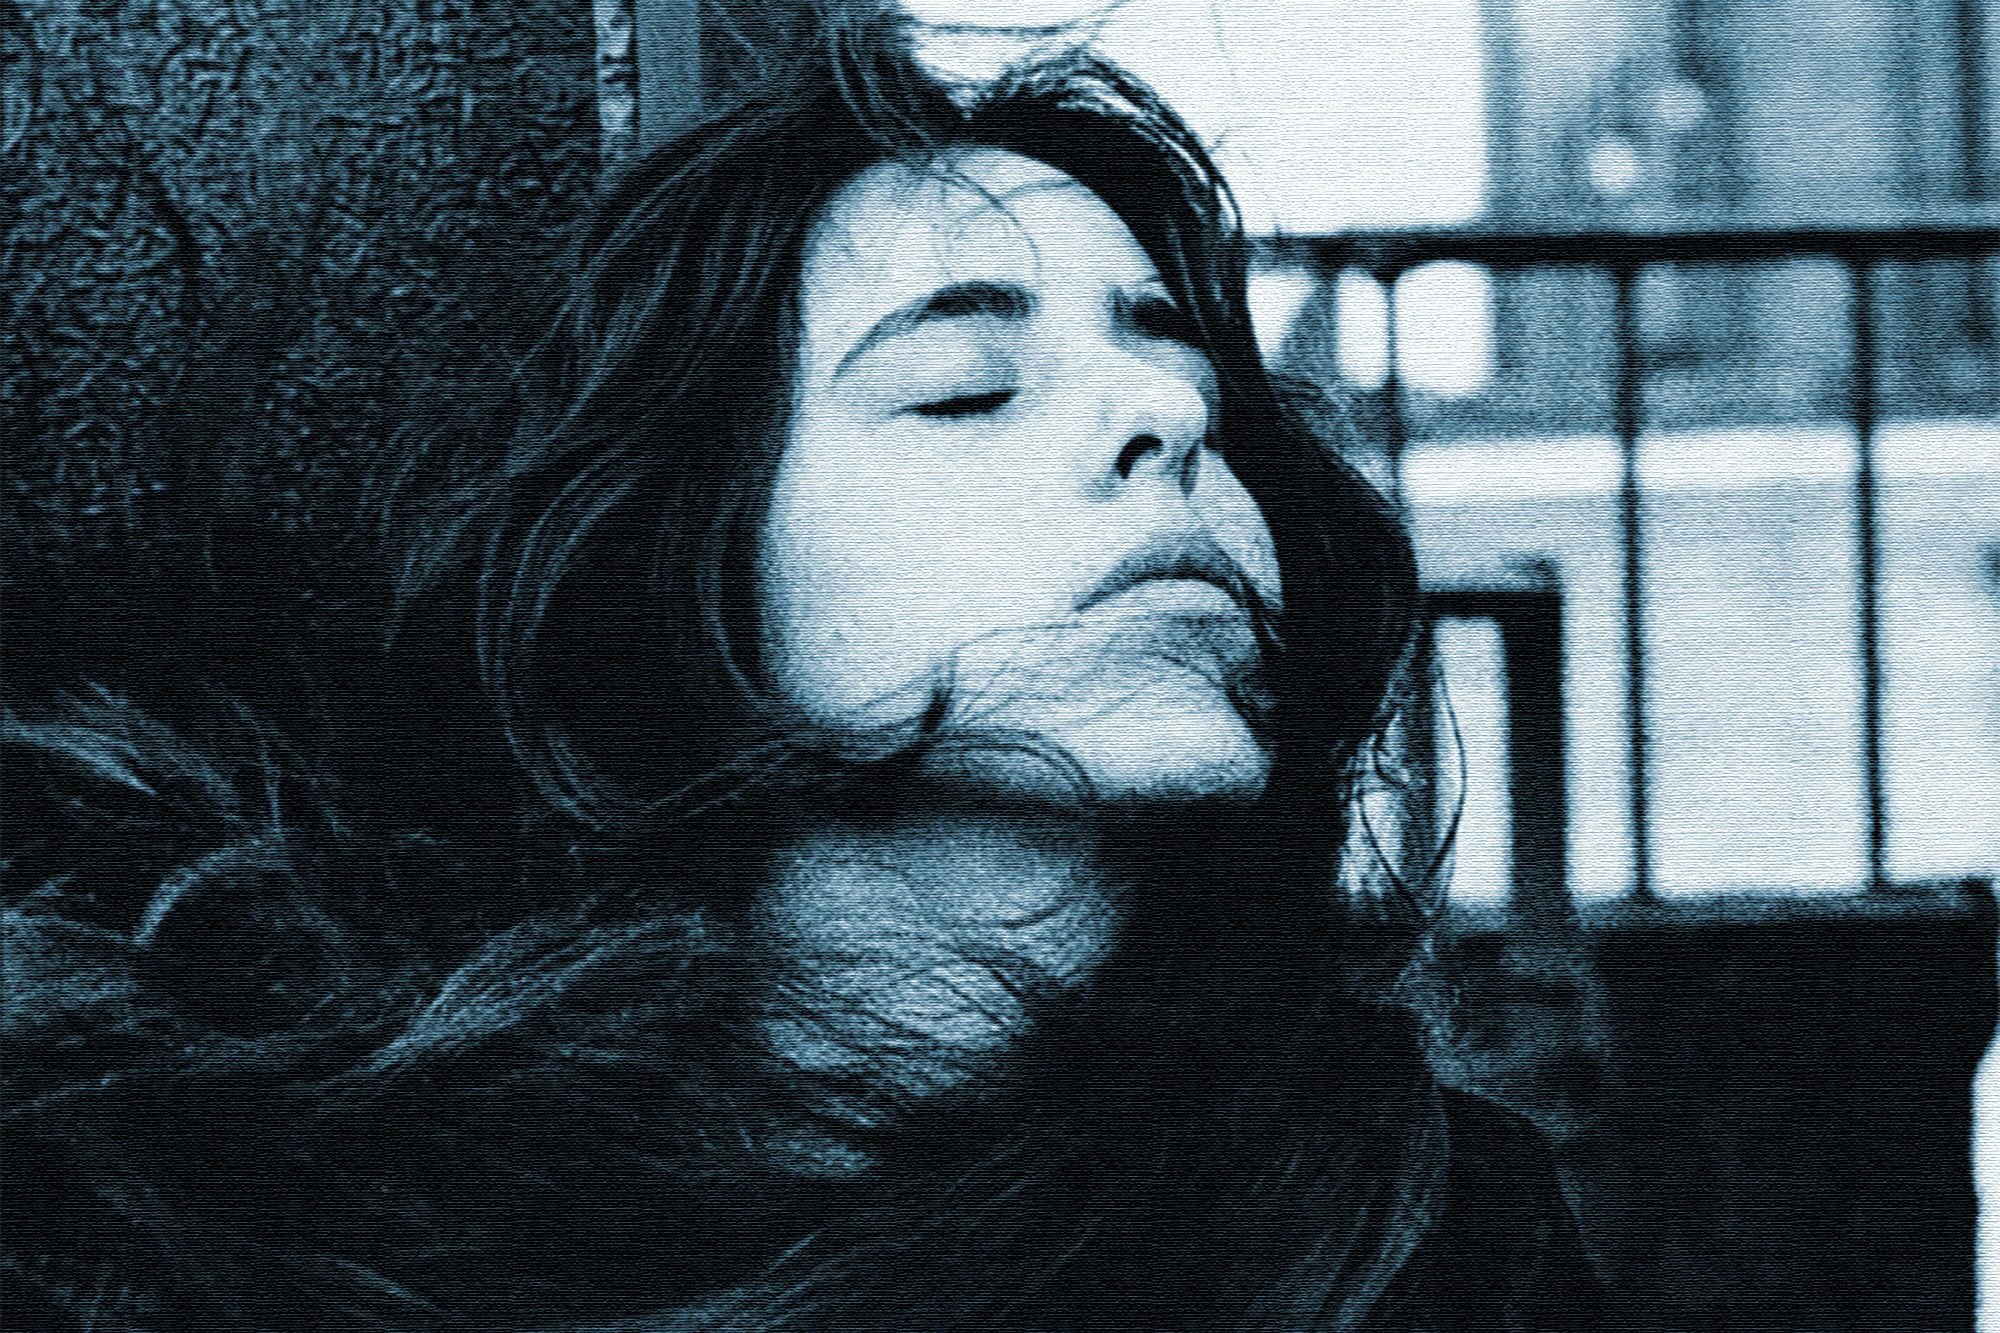 Laura Nyro’s “Save the Country” Calls Out from the Past